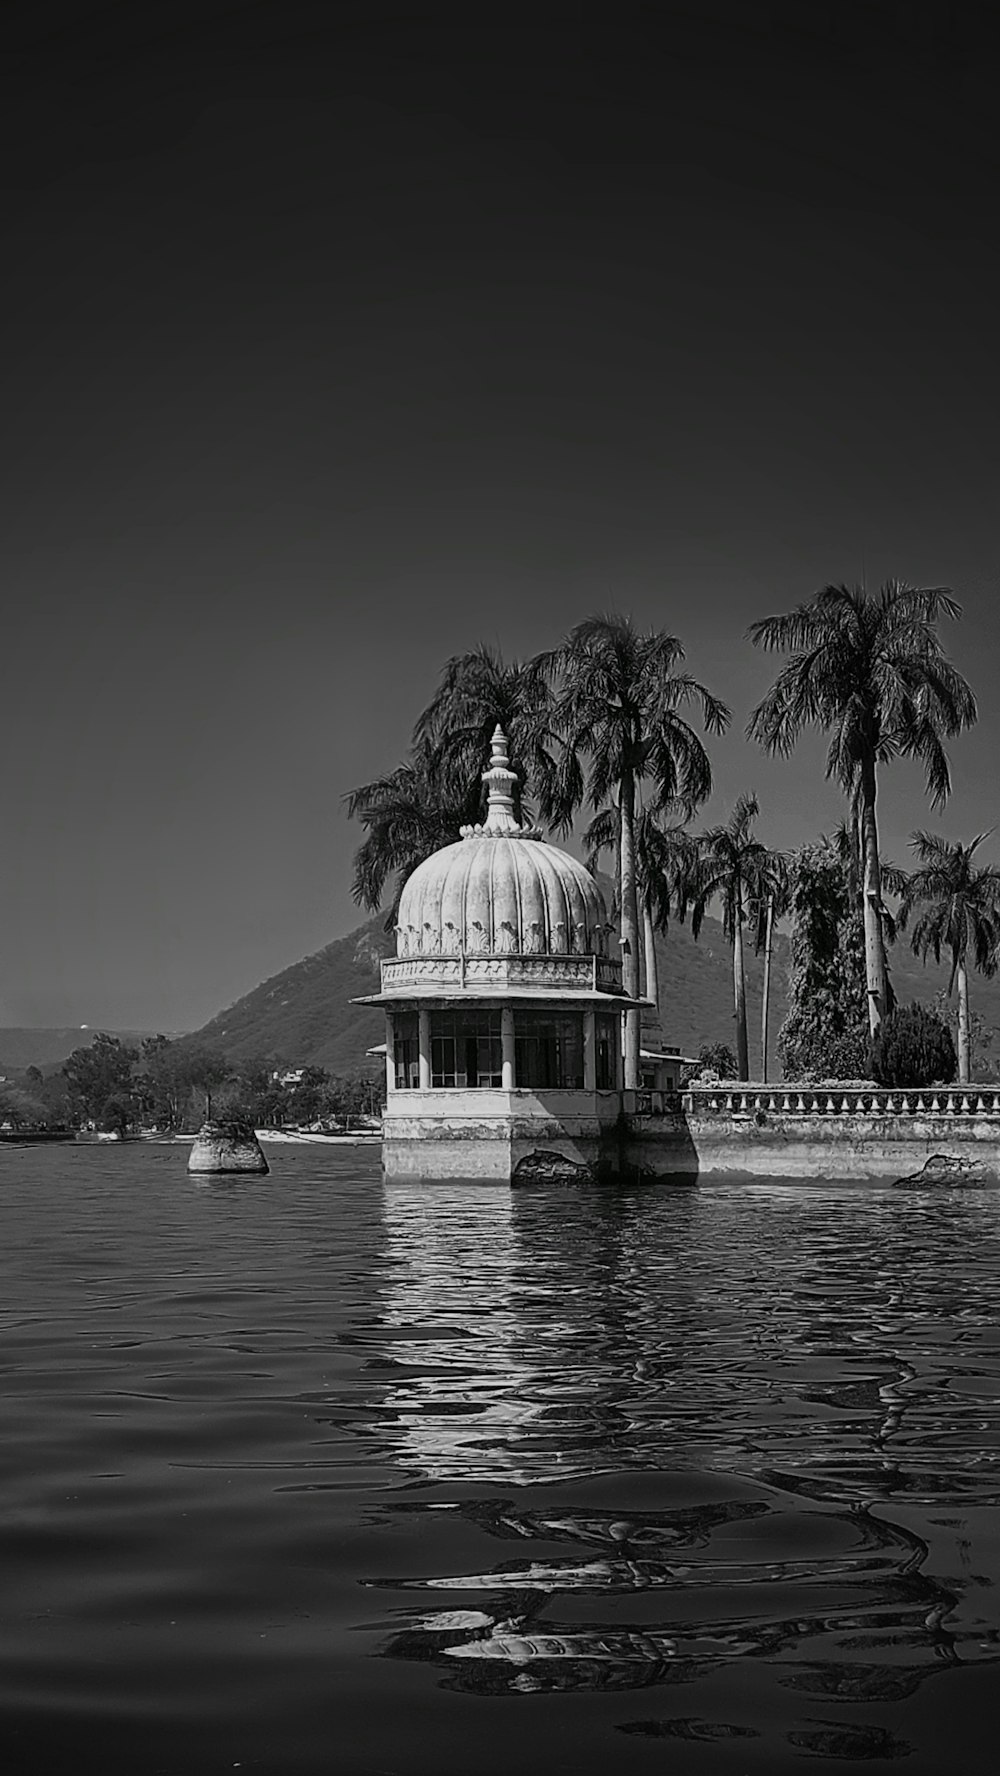 a building with a dome on top surrounded by water